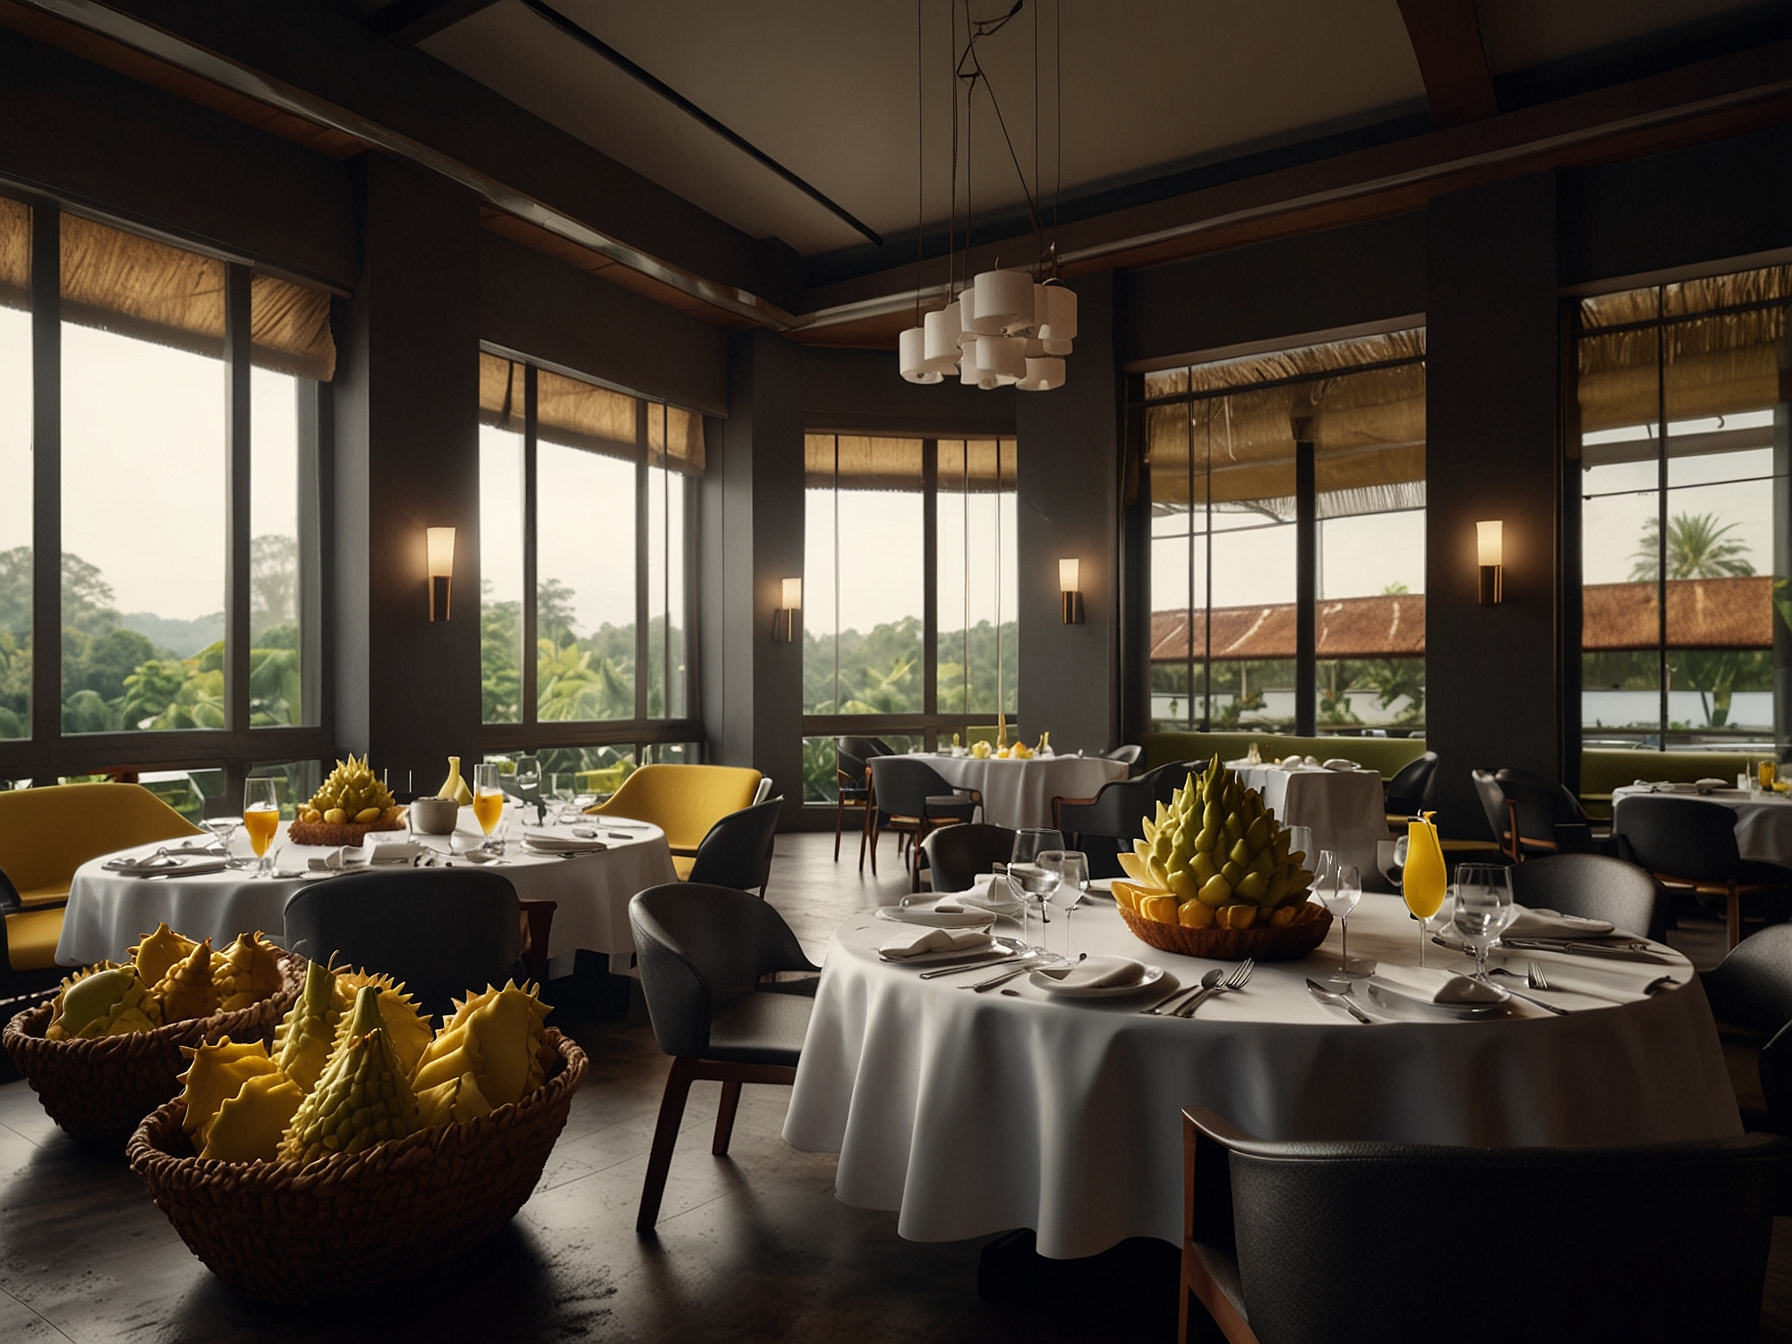 A luxurious dining setting featuring gourmet durian dishes. A chef presents durian-based desserts, symbolizing the fruit's transformation from a smelly oddity to a sought-after delicacy.